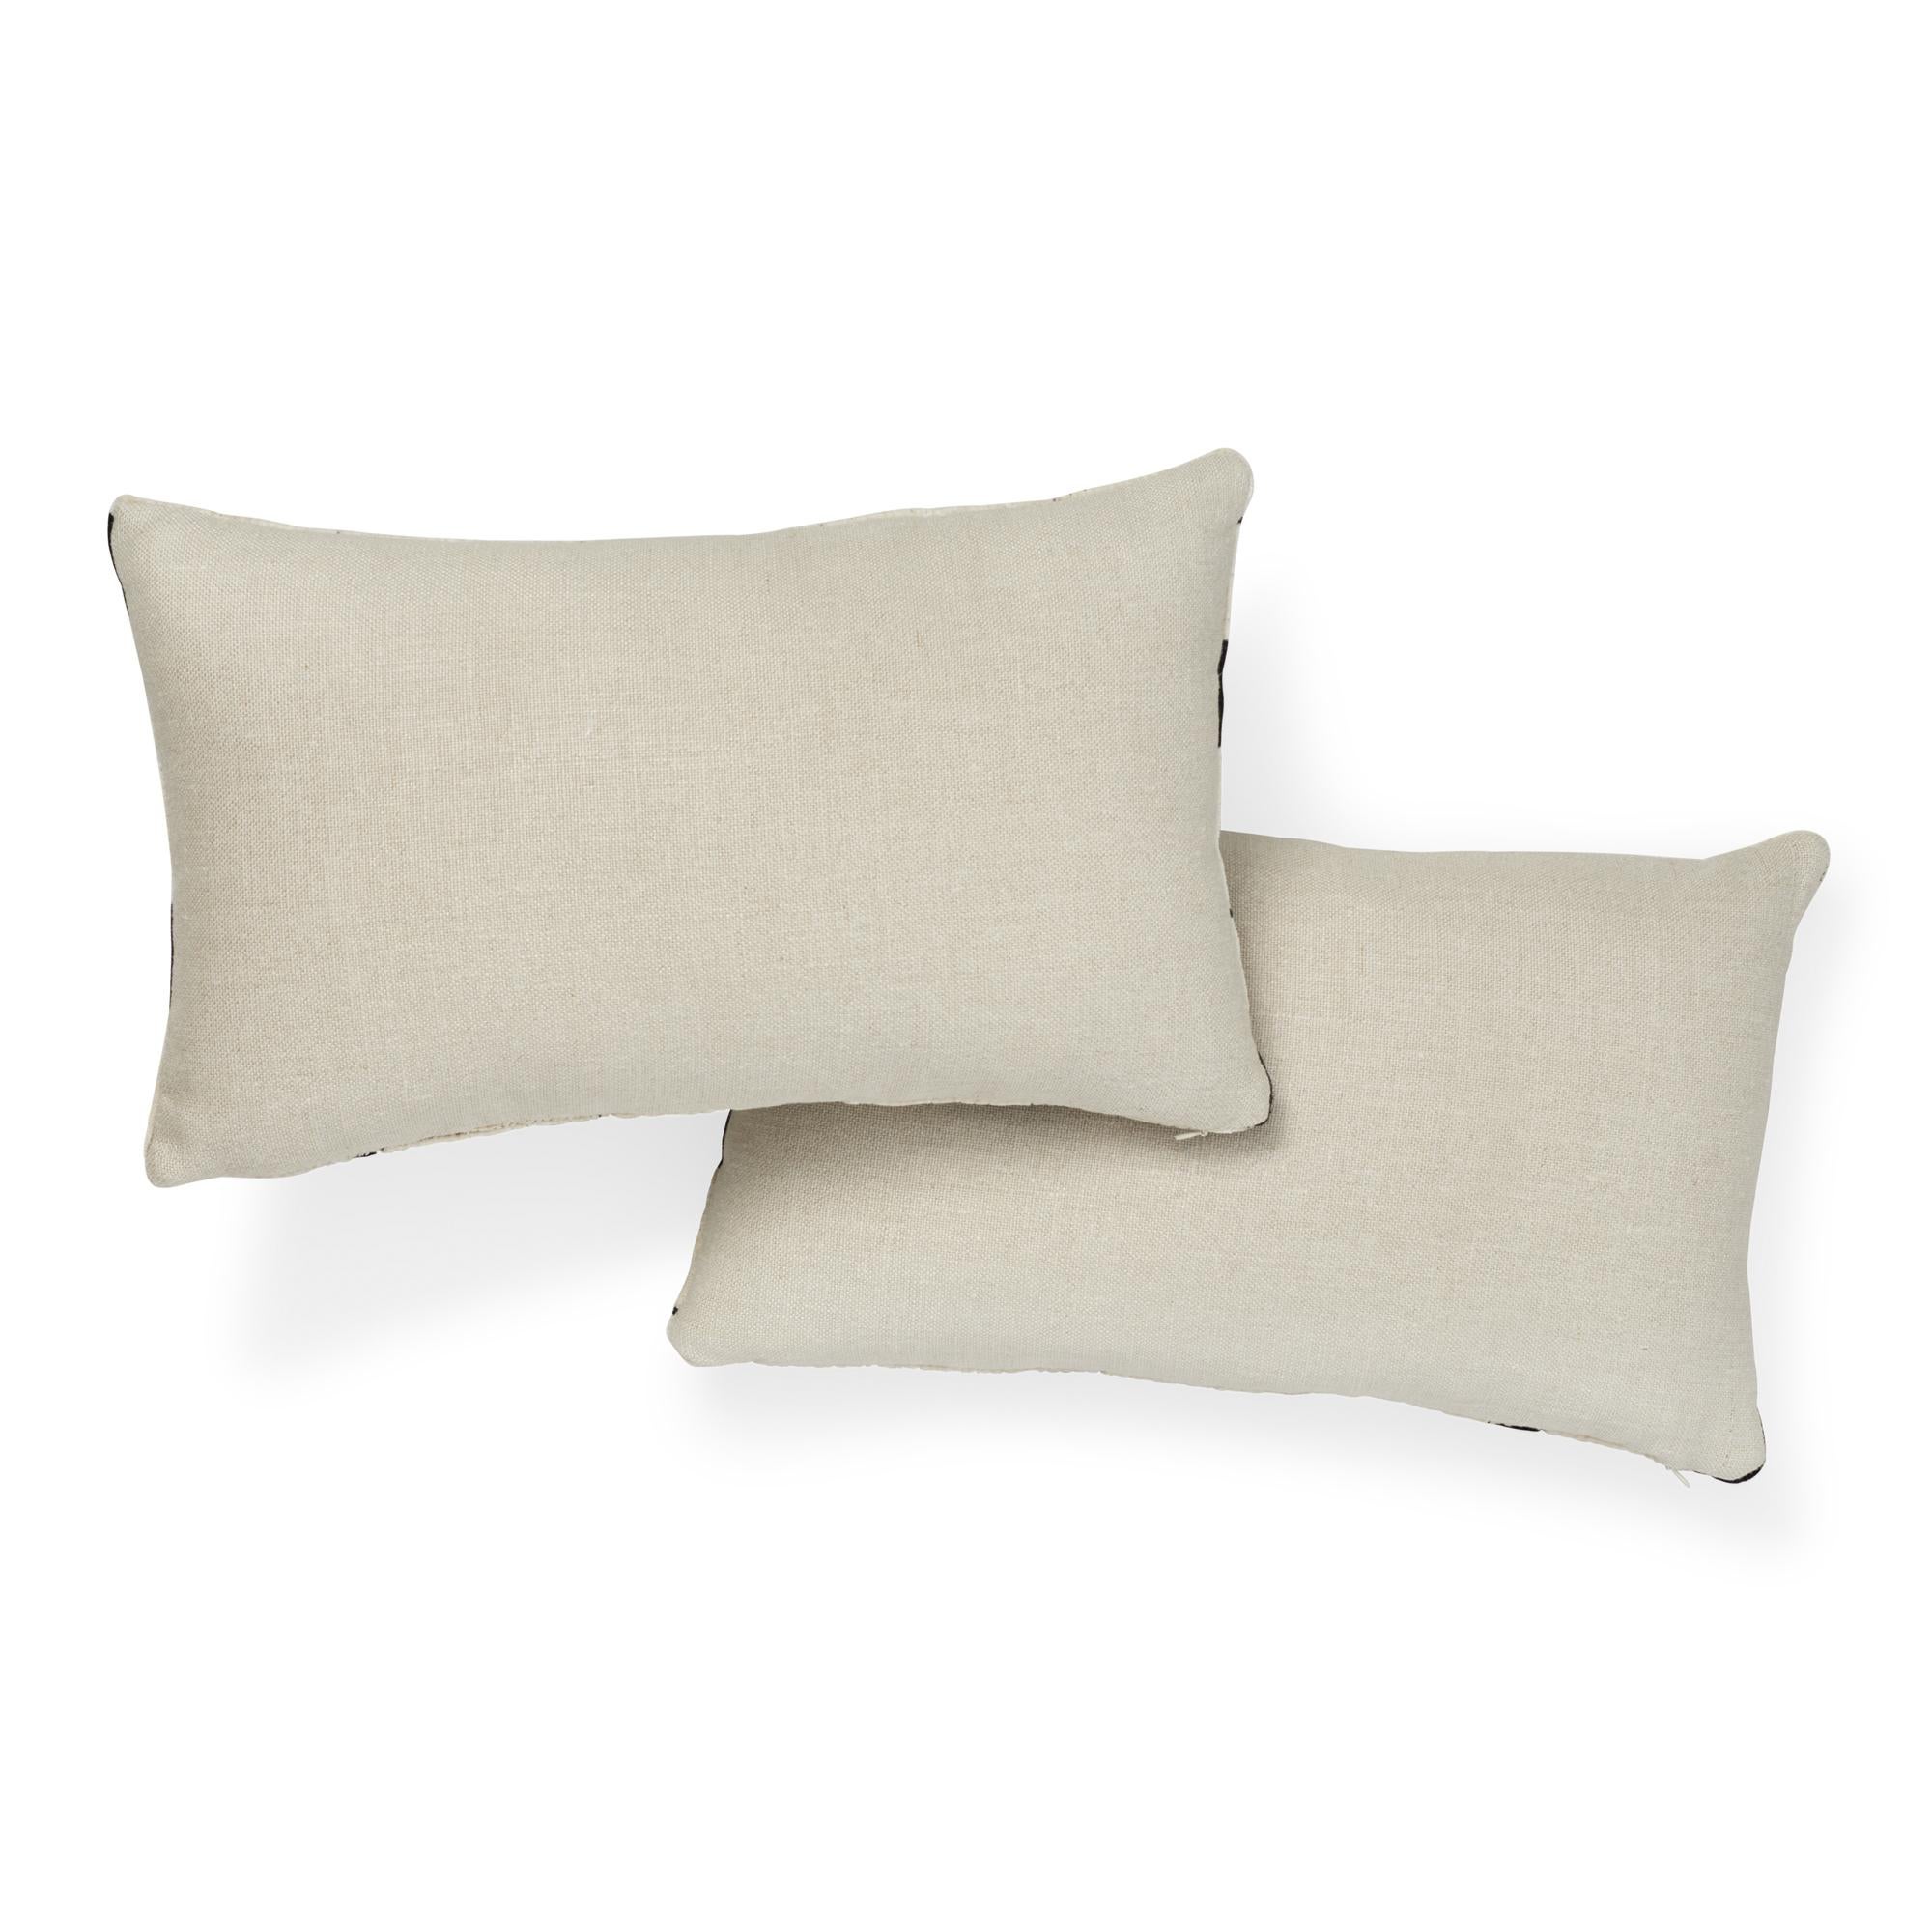 Schumacher x David Kaihoi Tutsi Ivory Cotton Linen Lumbar Pillow In New Condition For Sale In New York, NY